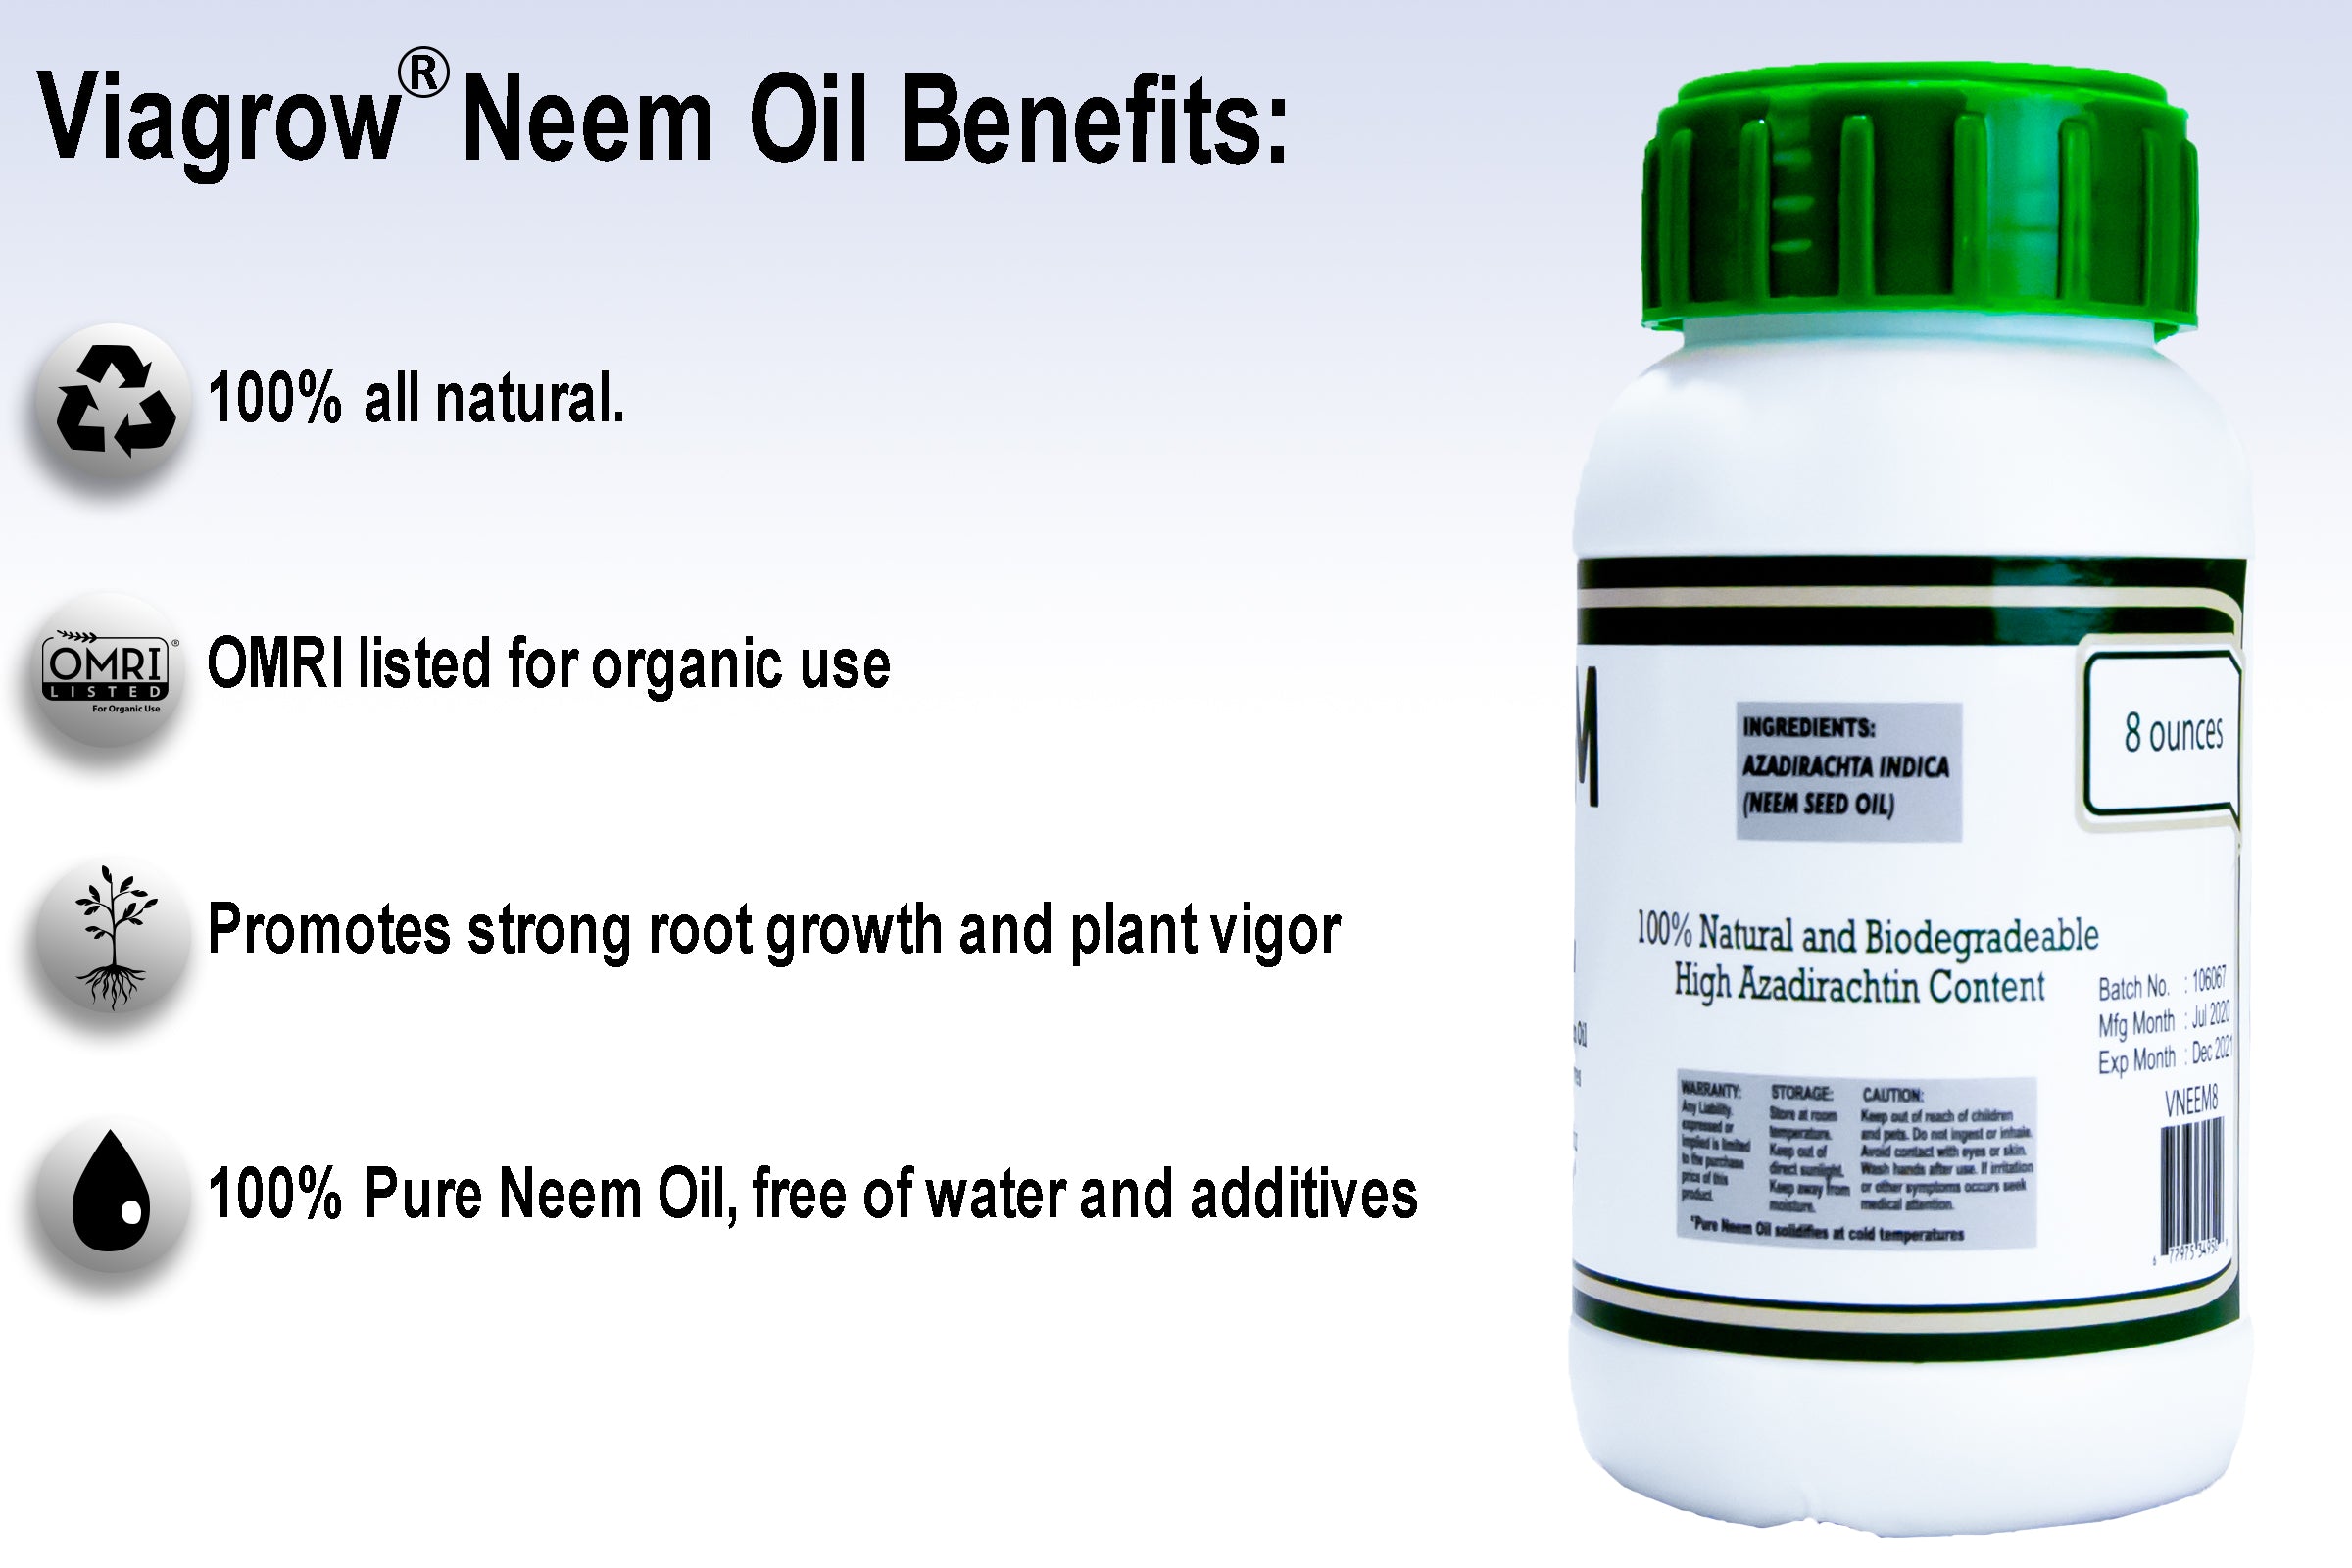 Viagrow Cold pressed Neem oil seed extract, 8oz / makes 12 gallons